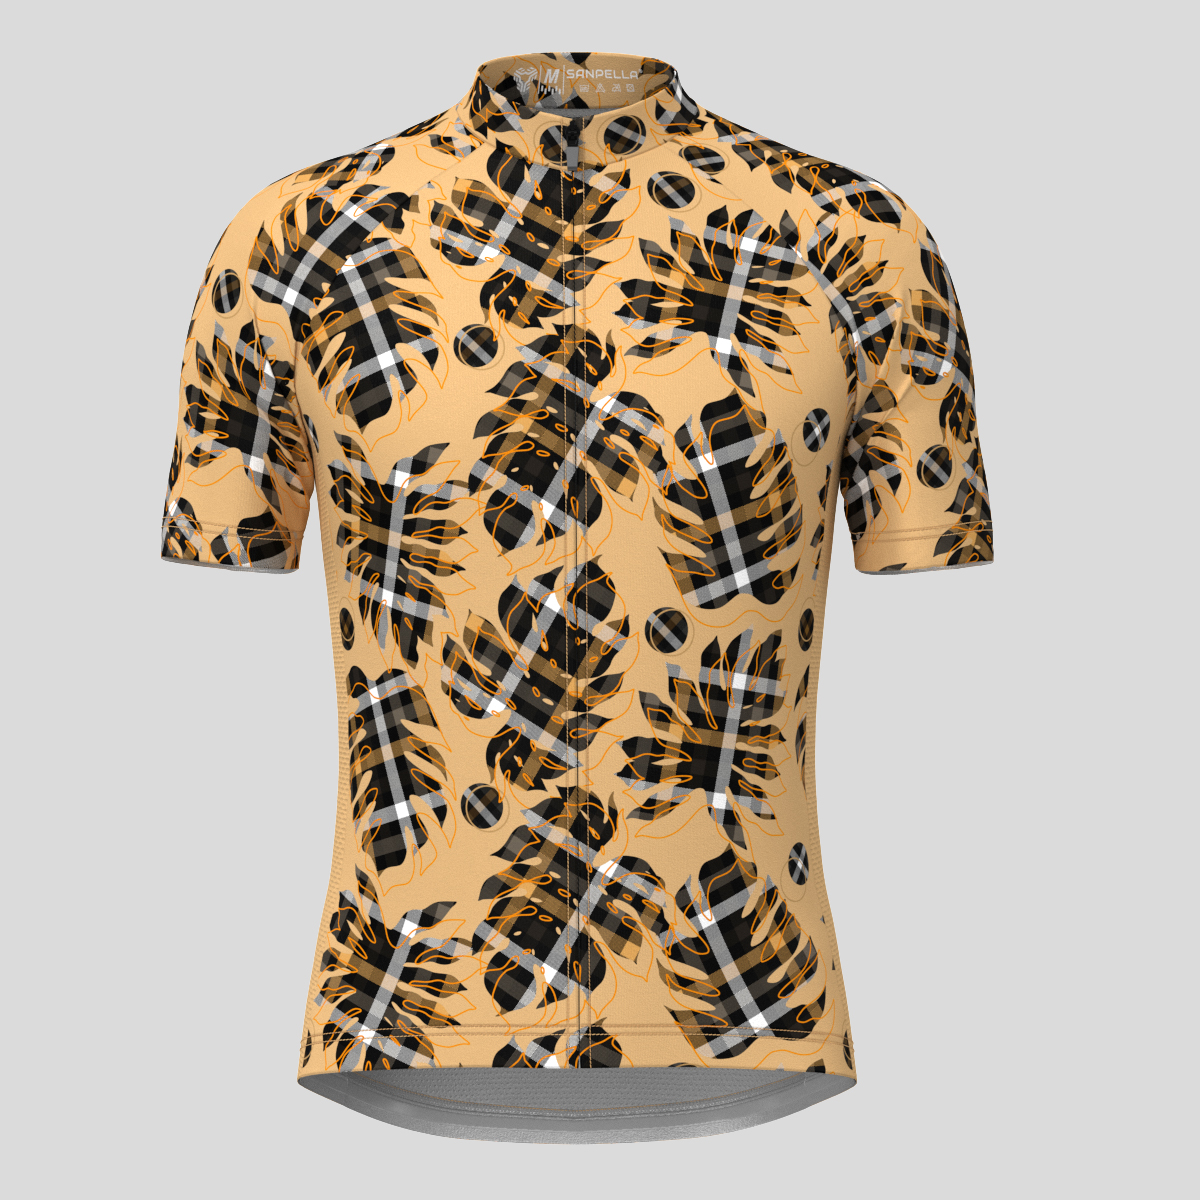 Plaid Textured Tropical Leaves Men's Cycling Jersey